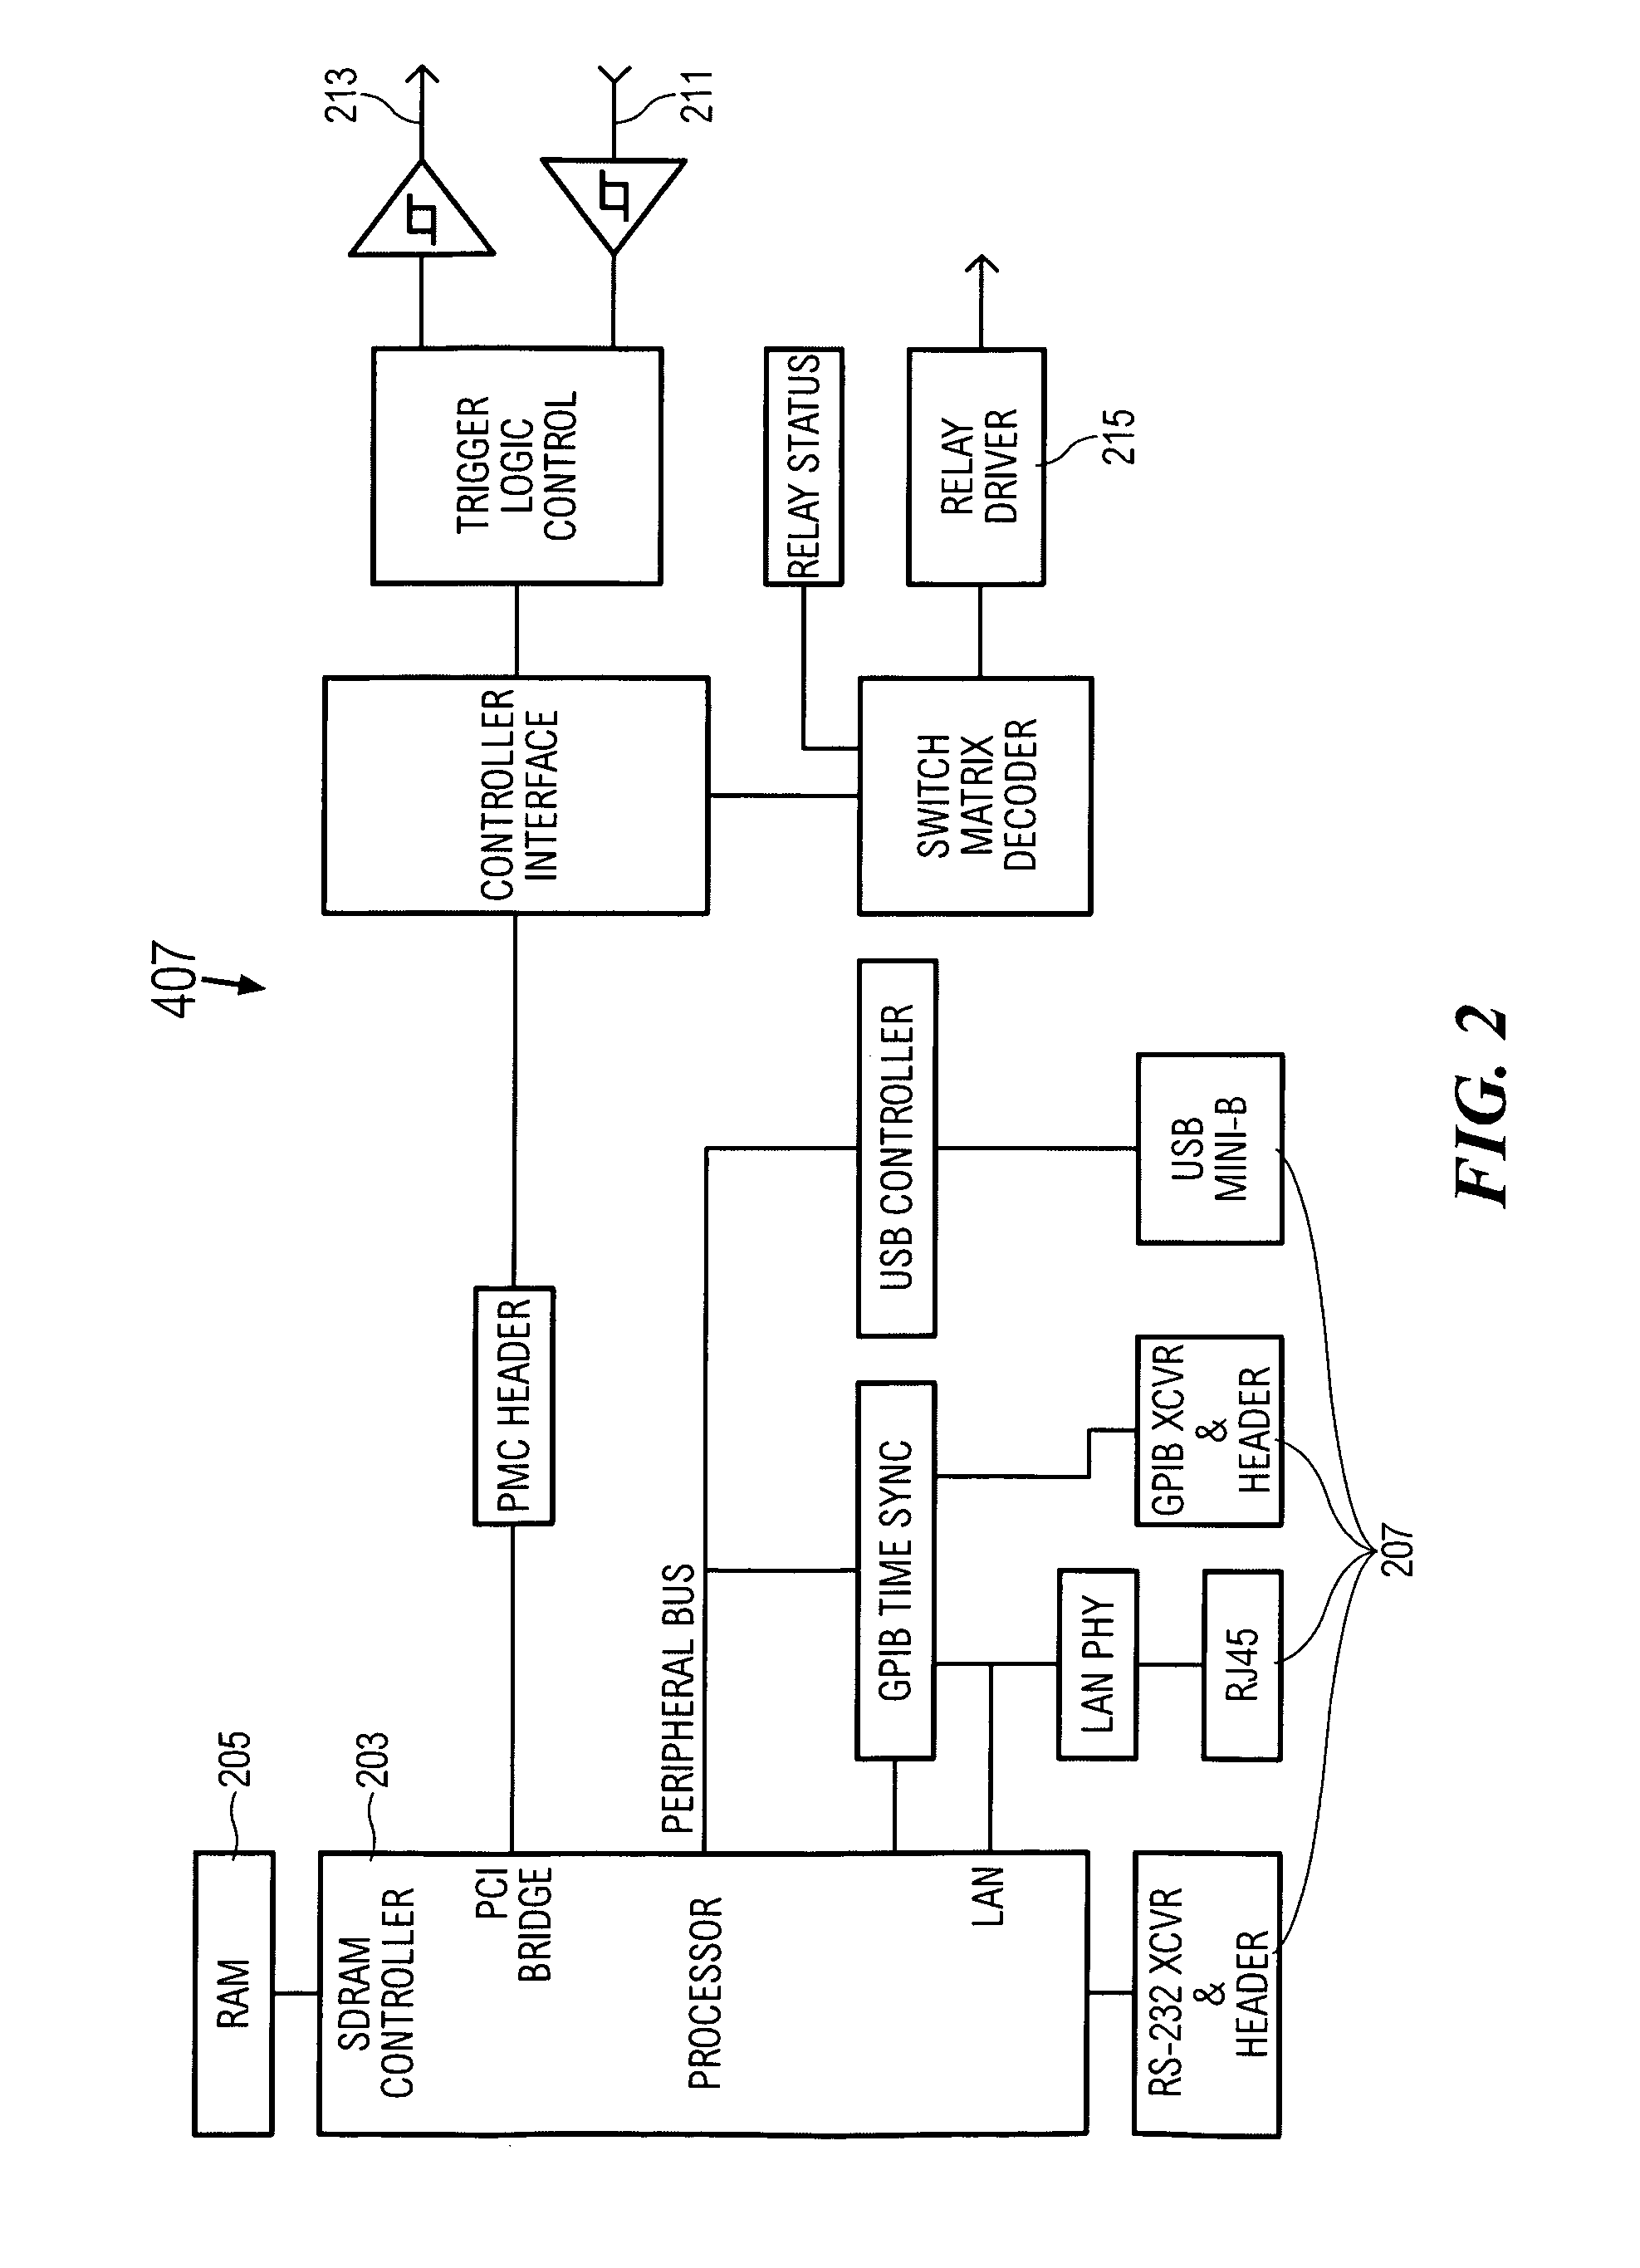 Reducing Test Time By Downloading Switching Sequences To An Enhanced Switch Unit